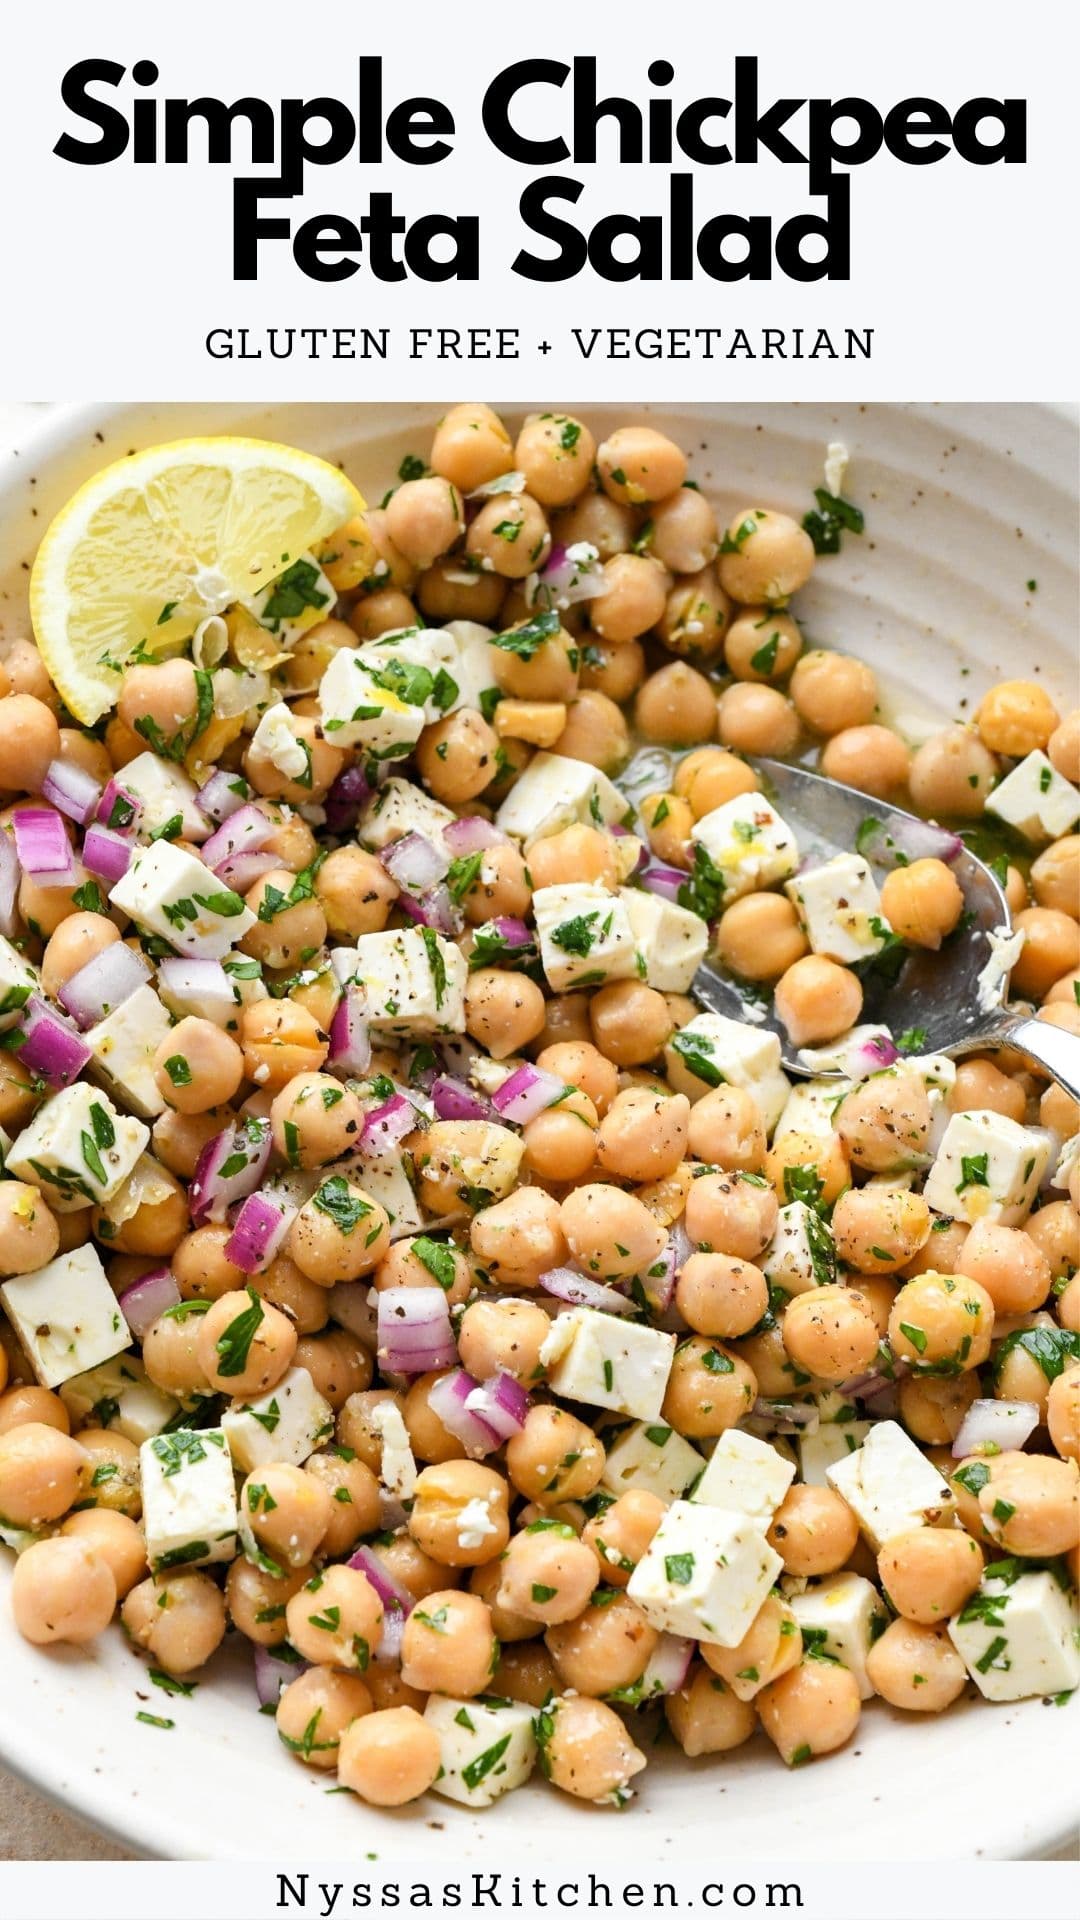 This lemony chickpea feta salad is a super simple and incredibly satisfying summer ready salad that is picnic ready! Made with sturdy chickpeas or garbanzo beans, bright and briny feta cheese, fresh herbs, and a simple lemony vinaigrette. Ready in less than 20 minutes and absolutely packed with flavor! Gluten free, vegetarian, and vegan option.